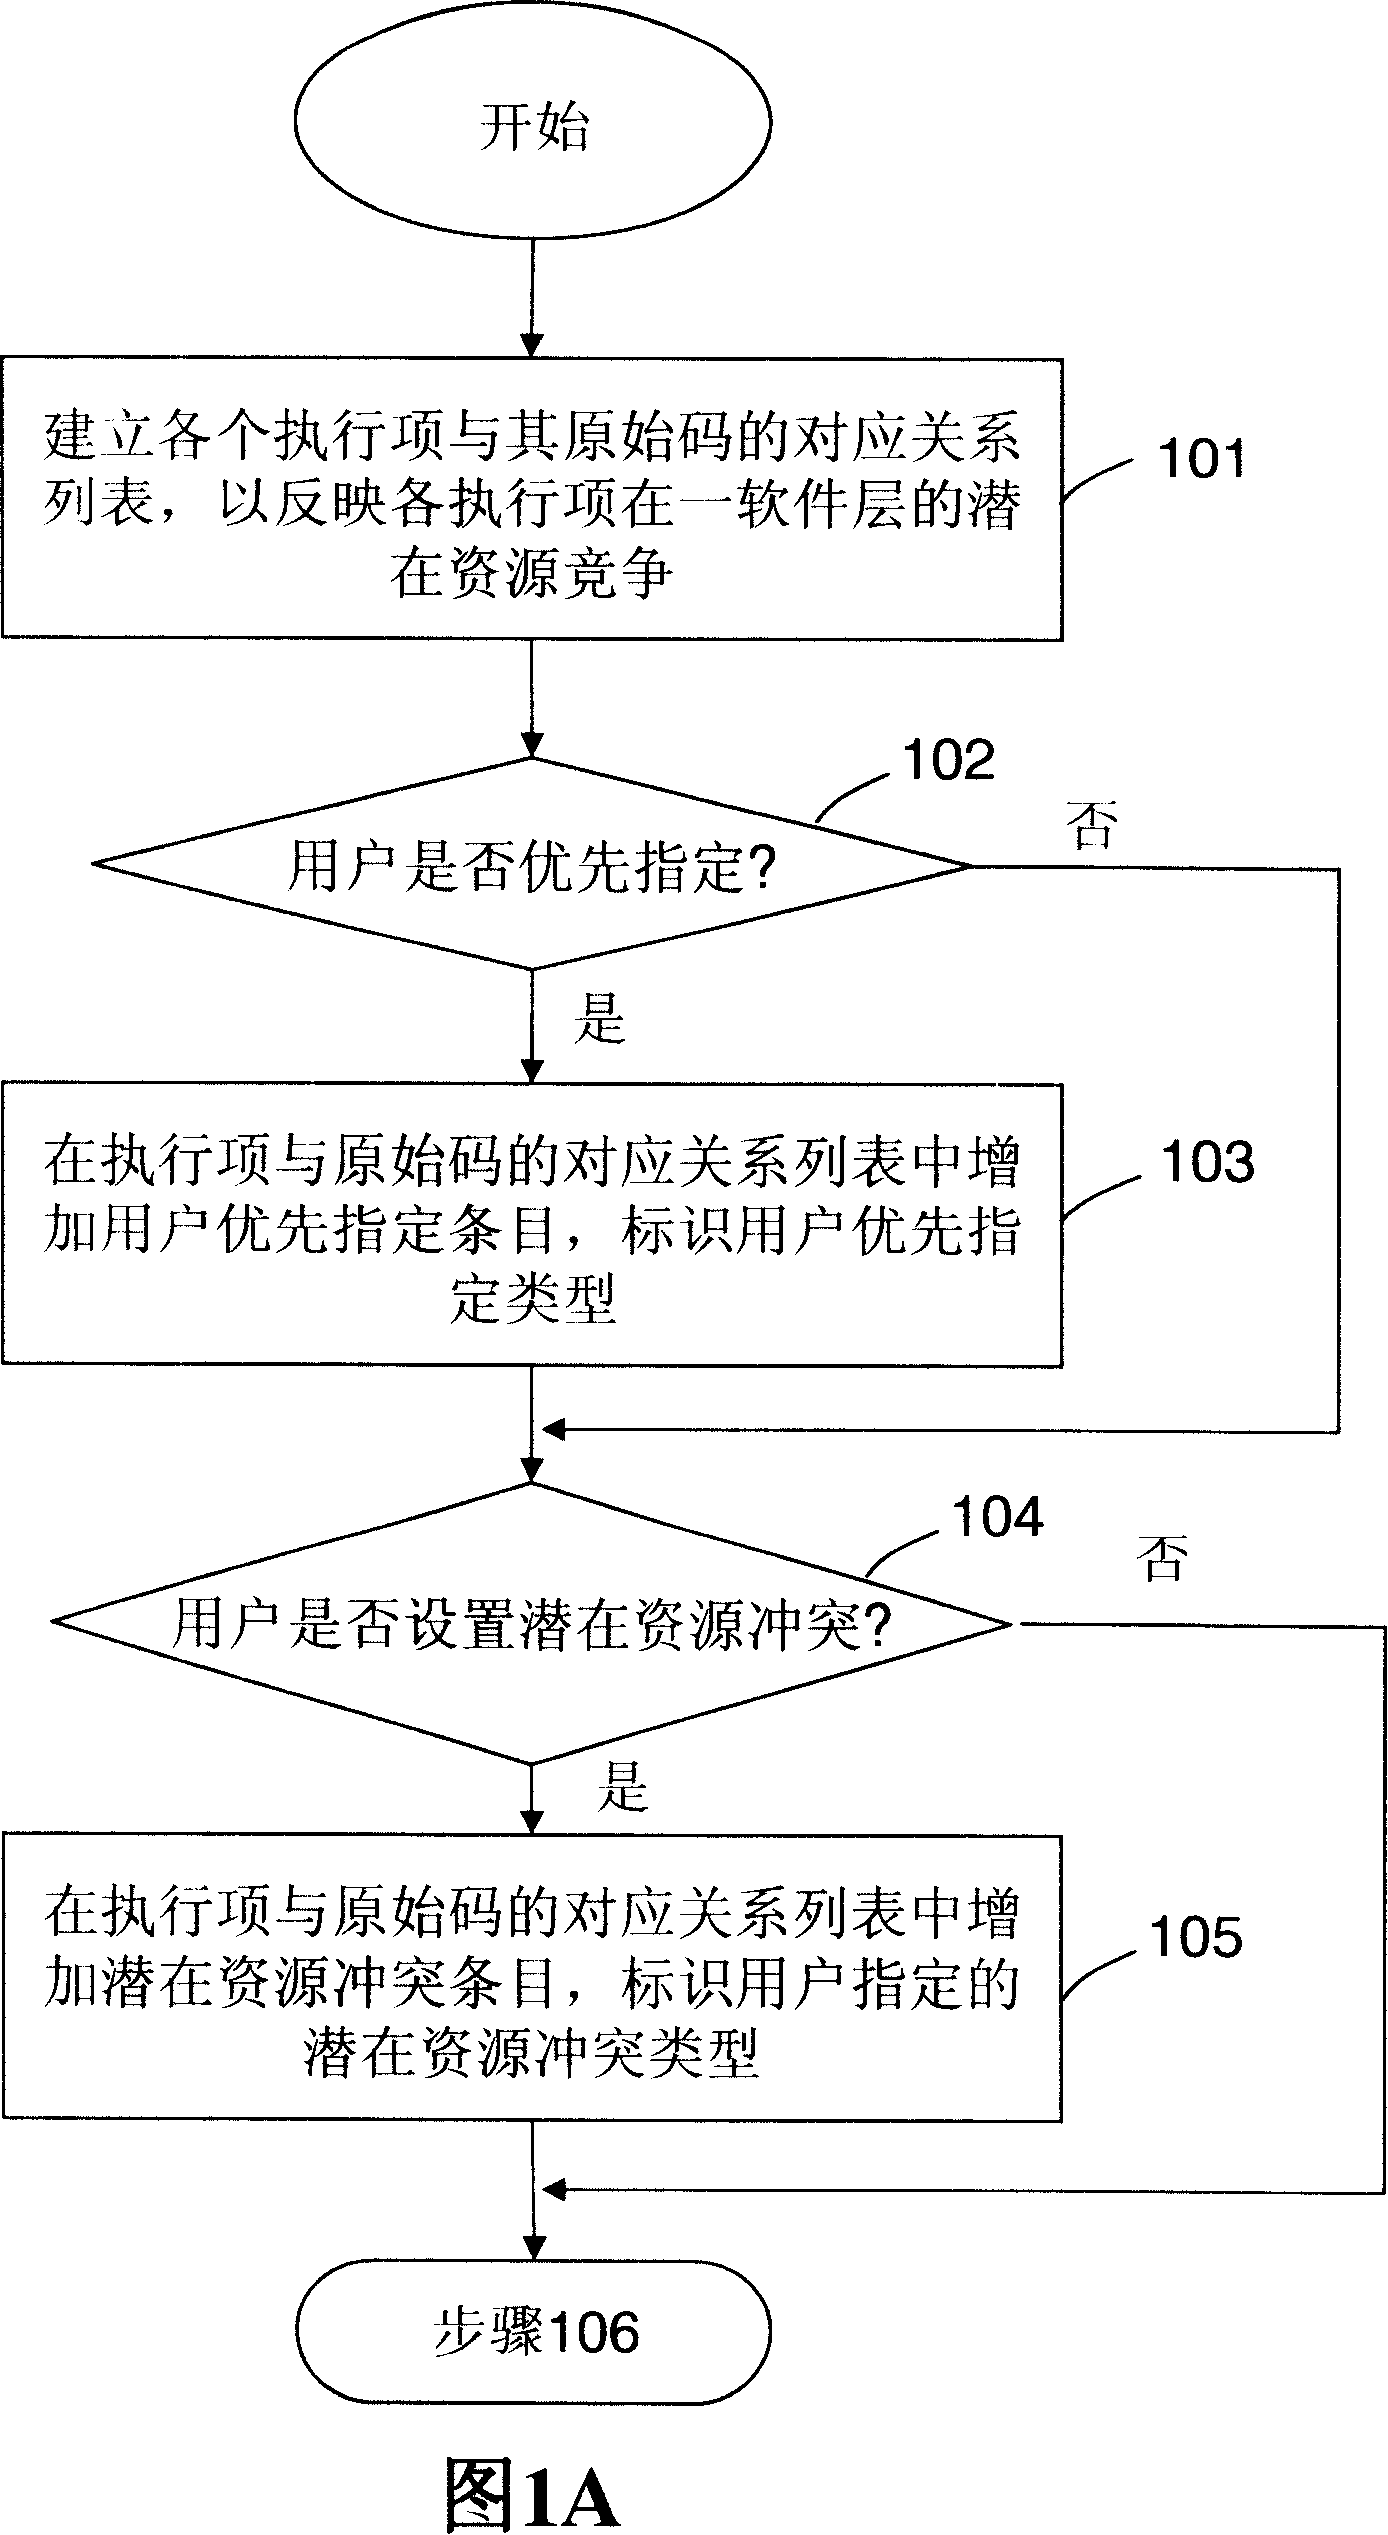 Performing thread distribution method for multi-nucleus multi-central processing unit